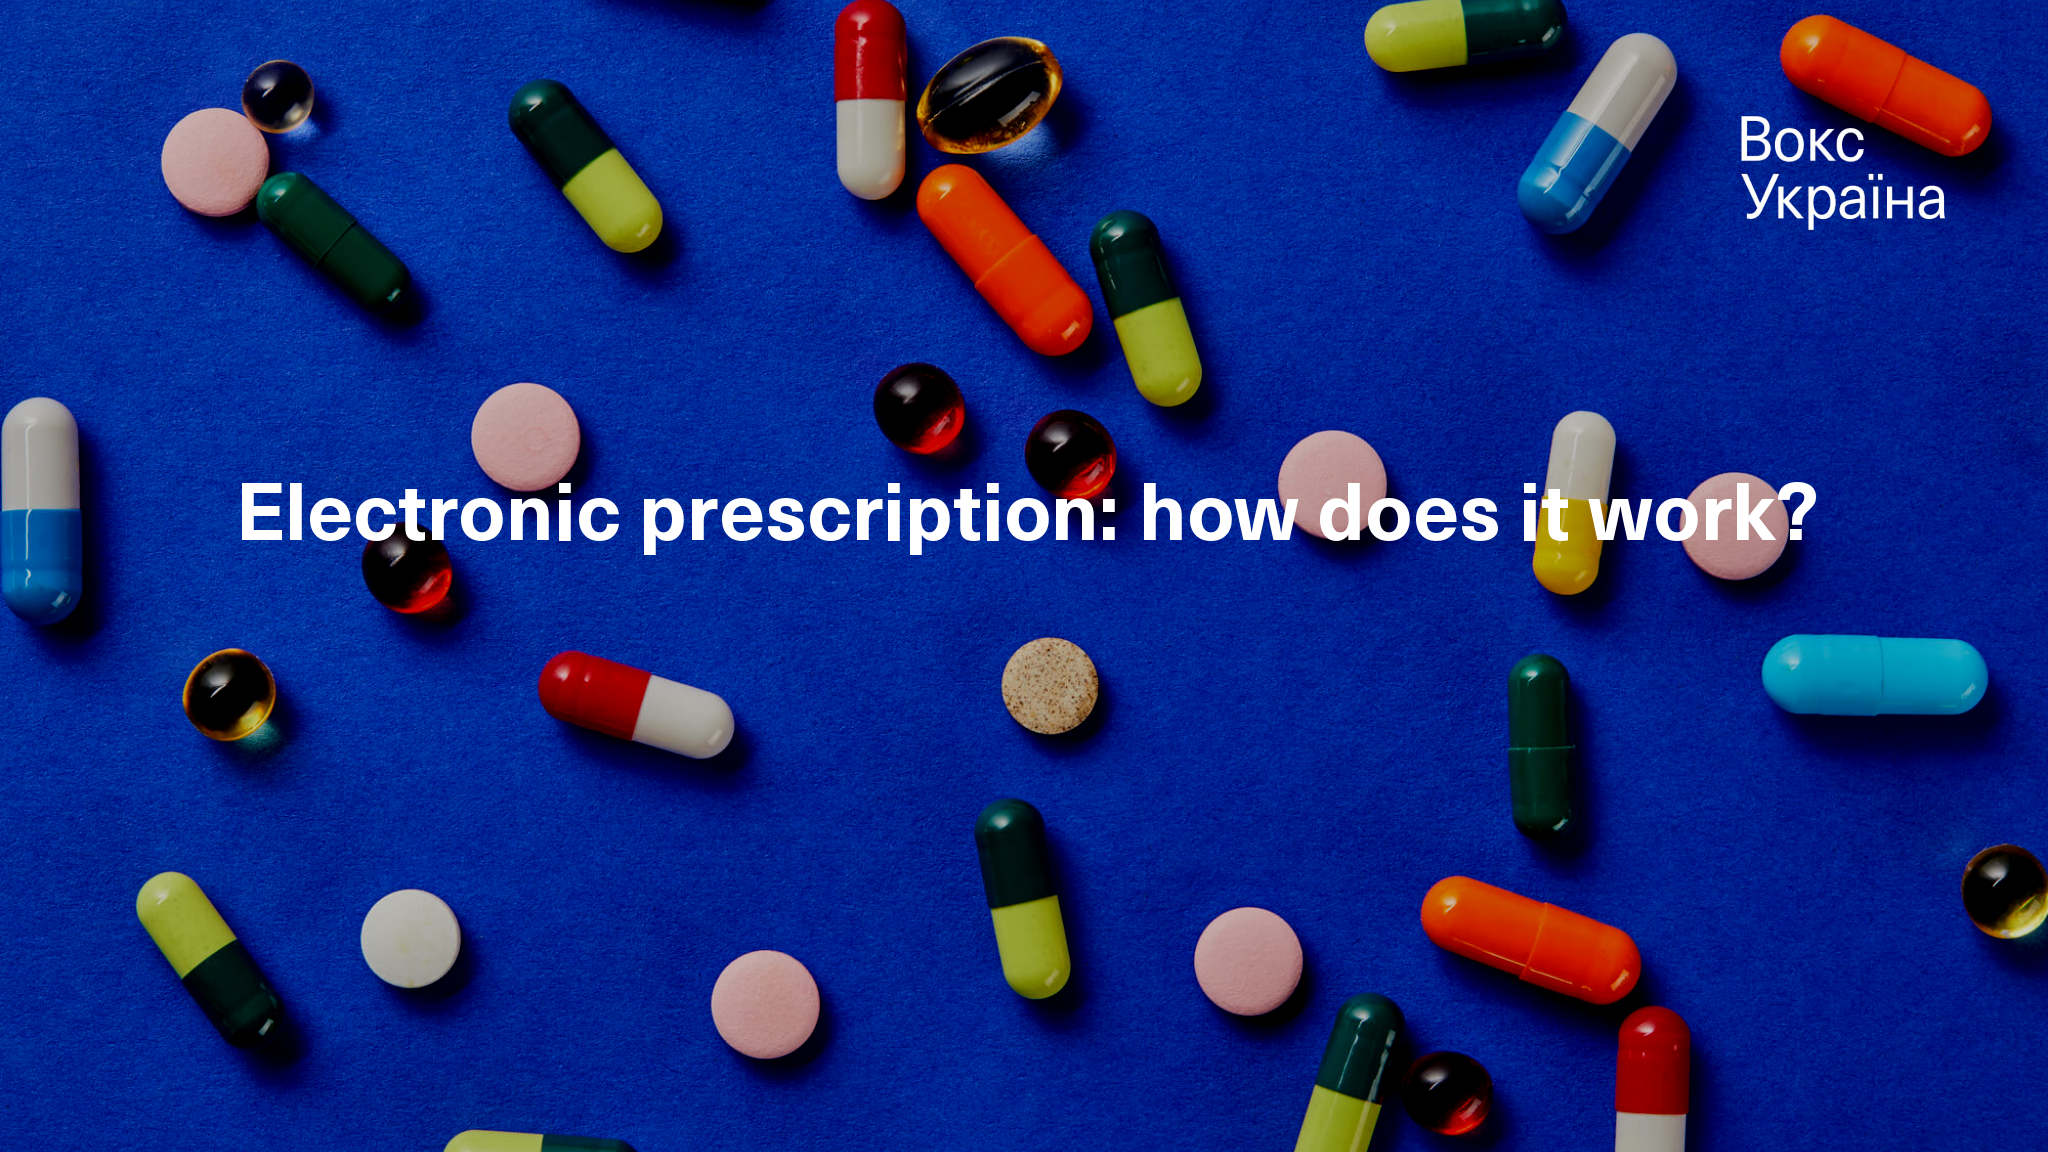 Electronic prescription: how does it work?